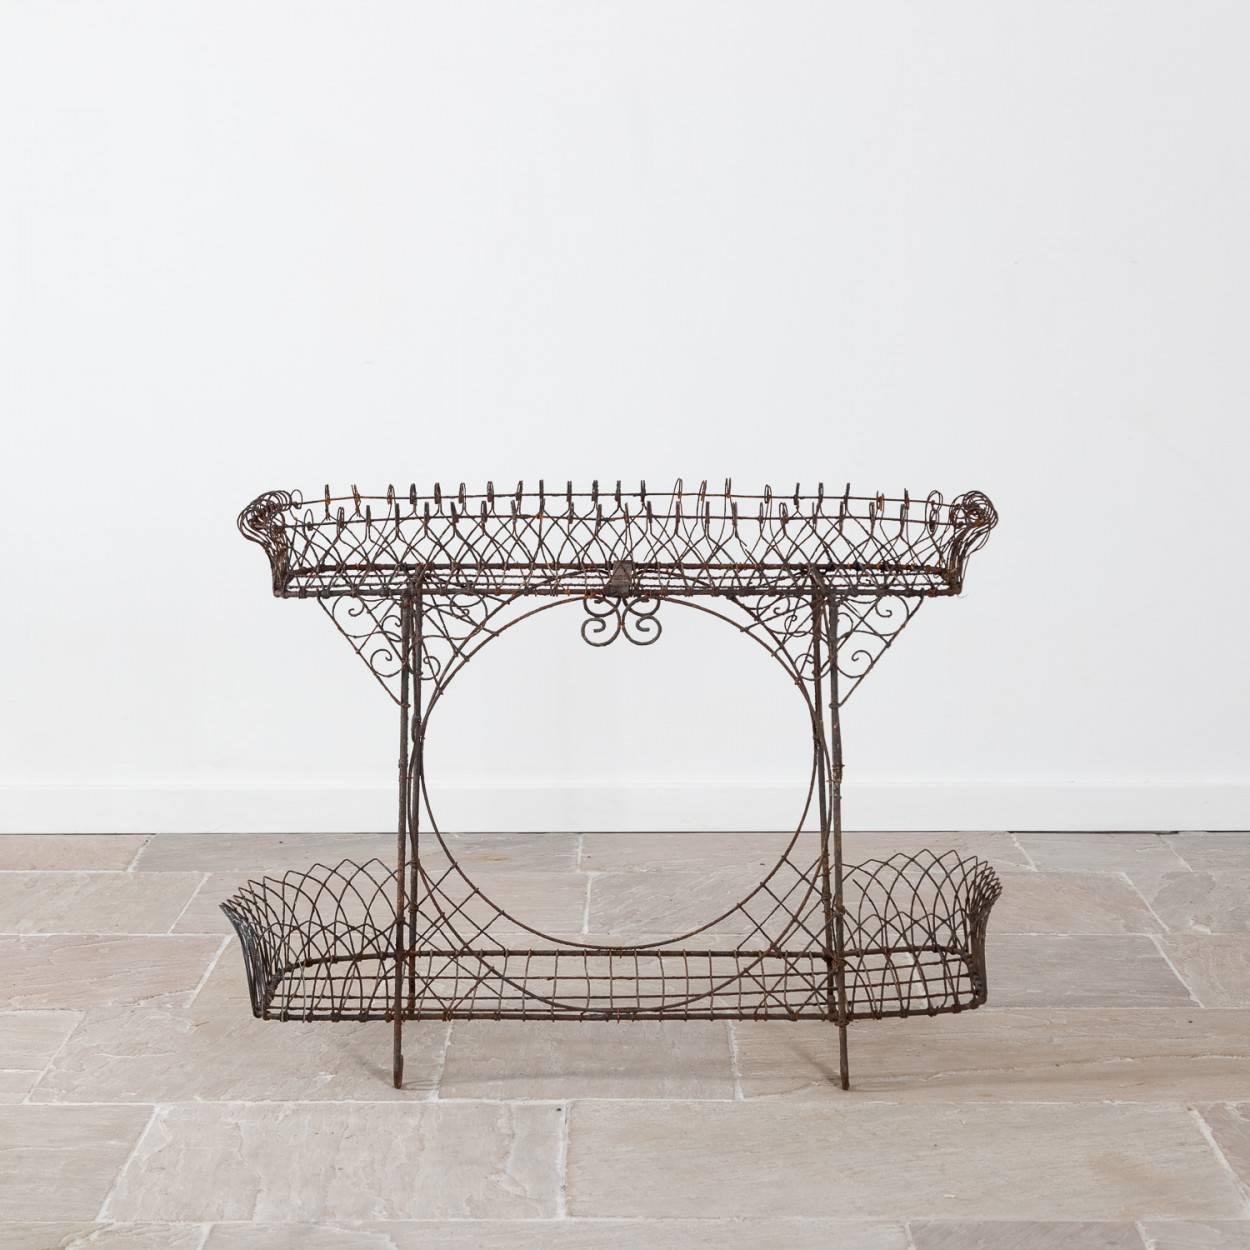 This is a beautiful Regency wirework plant stand, which is quite unusual in that it is deeper than most stands of this shape.

It is in very good condition for a piece of this age with only a few small breaks.

Measure: 82cm high, 107cm wide and